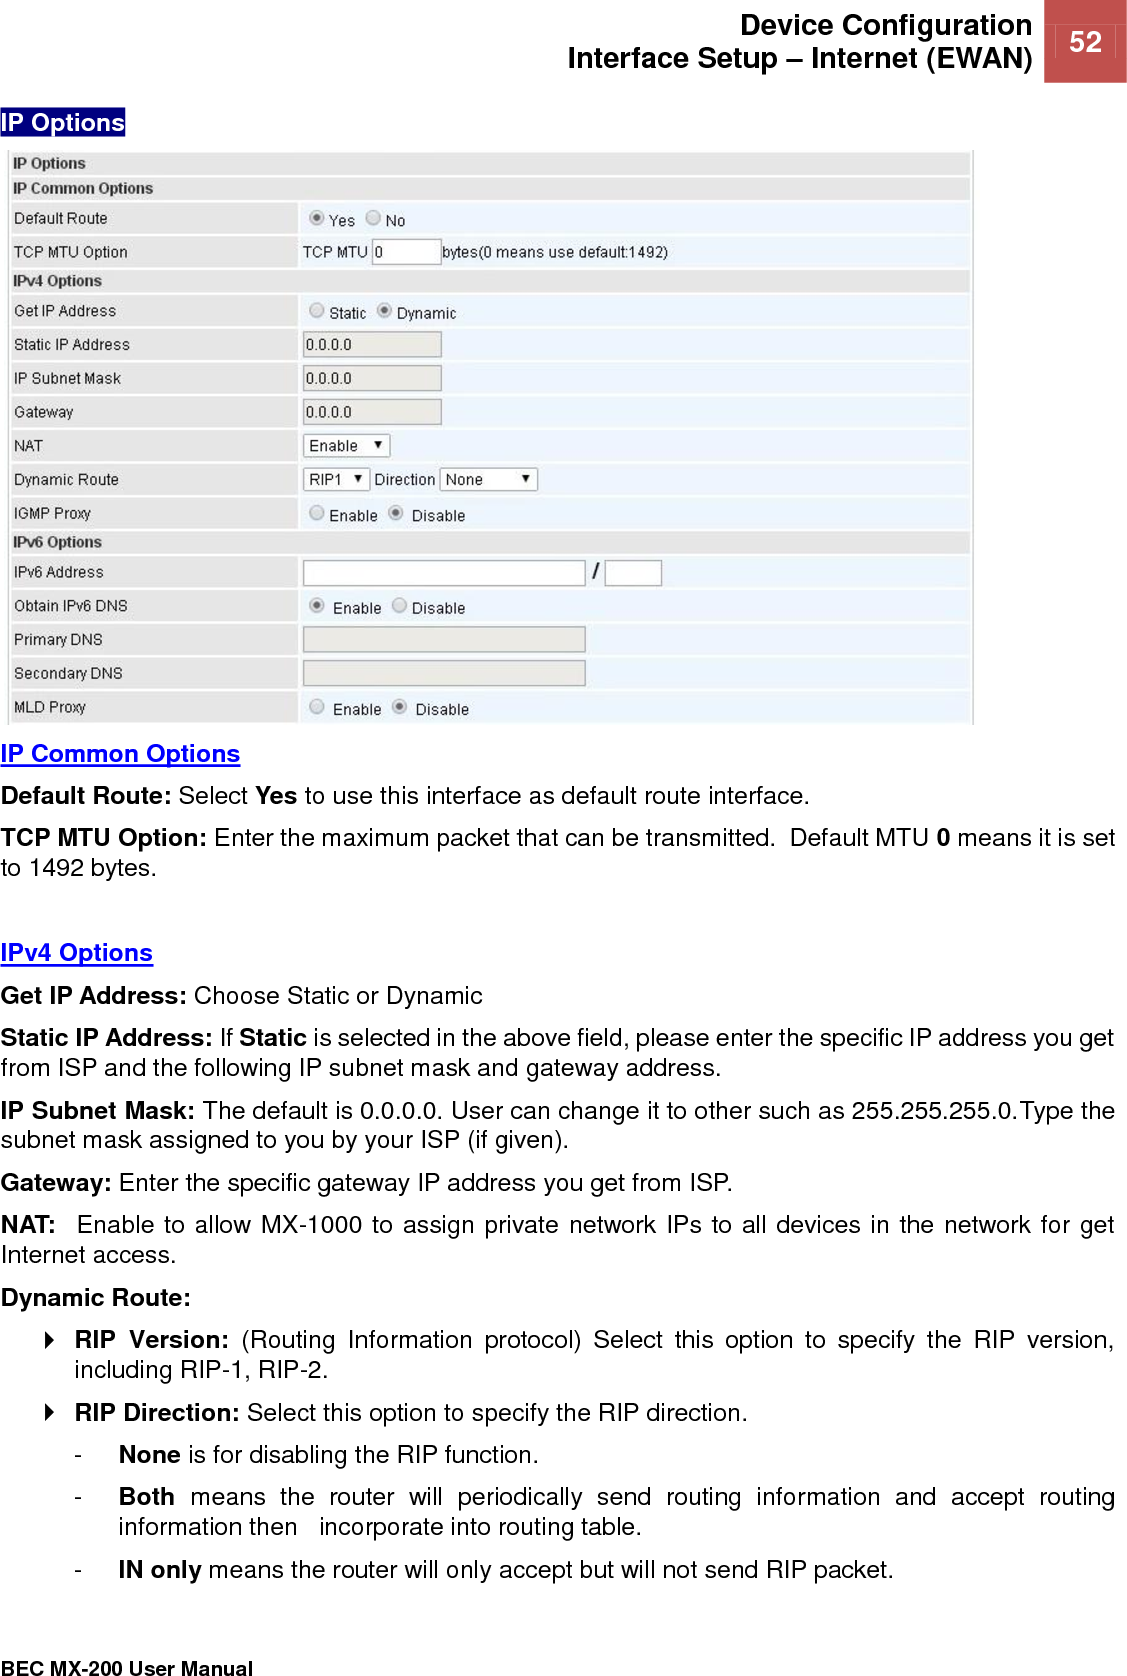  Device Configuration Interface Setup – Internet (EWAN) 52   BEC MX-200 User Manual  IP Options  IP Common Options Default Route: Select Yes to use this interface as default route interface. TCP MTU Option: Enter the maximum packet that can be transmitted.  Default MTU 0 means it is set to 1492 bytes.    IPv4 Options Get IP Address: Choose Static or Dynamic Static IP Address: If Static is selected in the above field, please enter the specific IP address you get from ISP and the following IP subnet mask and gateway address. IP Subnet Mask: The default is 0.0.0.0. User can change it to other such as 255.255.255.0.Type the subnet mask assigned to you by your ISP (if given). Gateway: Enter the specific gateway IP address you get from ISP. NAT:  Enable to allow MX-1000 to assign private network IPs to all devices in the network for get Internet access. Dynamic Route:   RIP  Version:  (Routing  Information  protocol)  Select  this  option  to  specify  the  RIP  version, including RIP-1, RIP-2.   RIP Direction: Select this option to specify the RIP direction.  -  None is for disabling the RIP function.  -  Both  means  the  router  will  periodically  send  routing  information  and  accept  routing information then   incorporate into routing table.  -  IN only means the router will only accept but will not send RIP packet.  